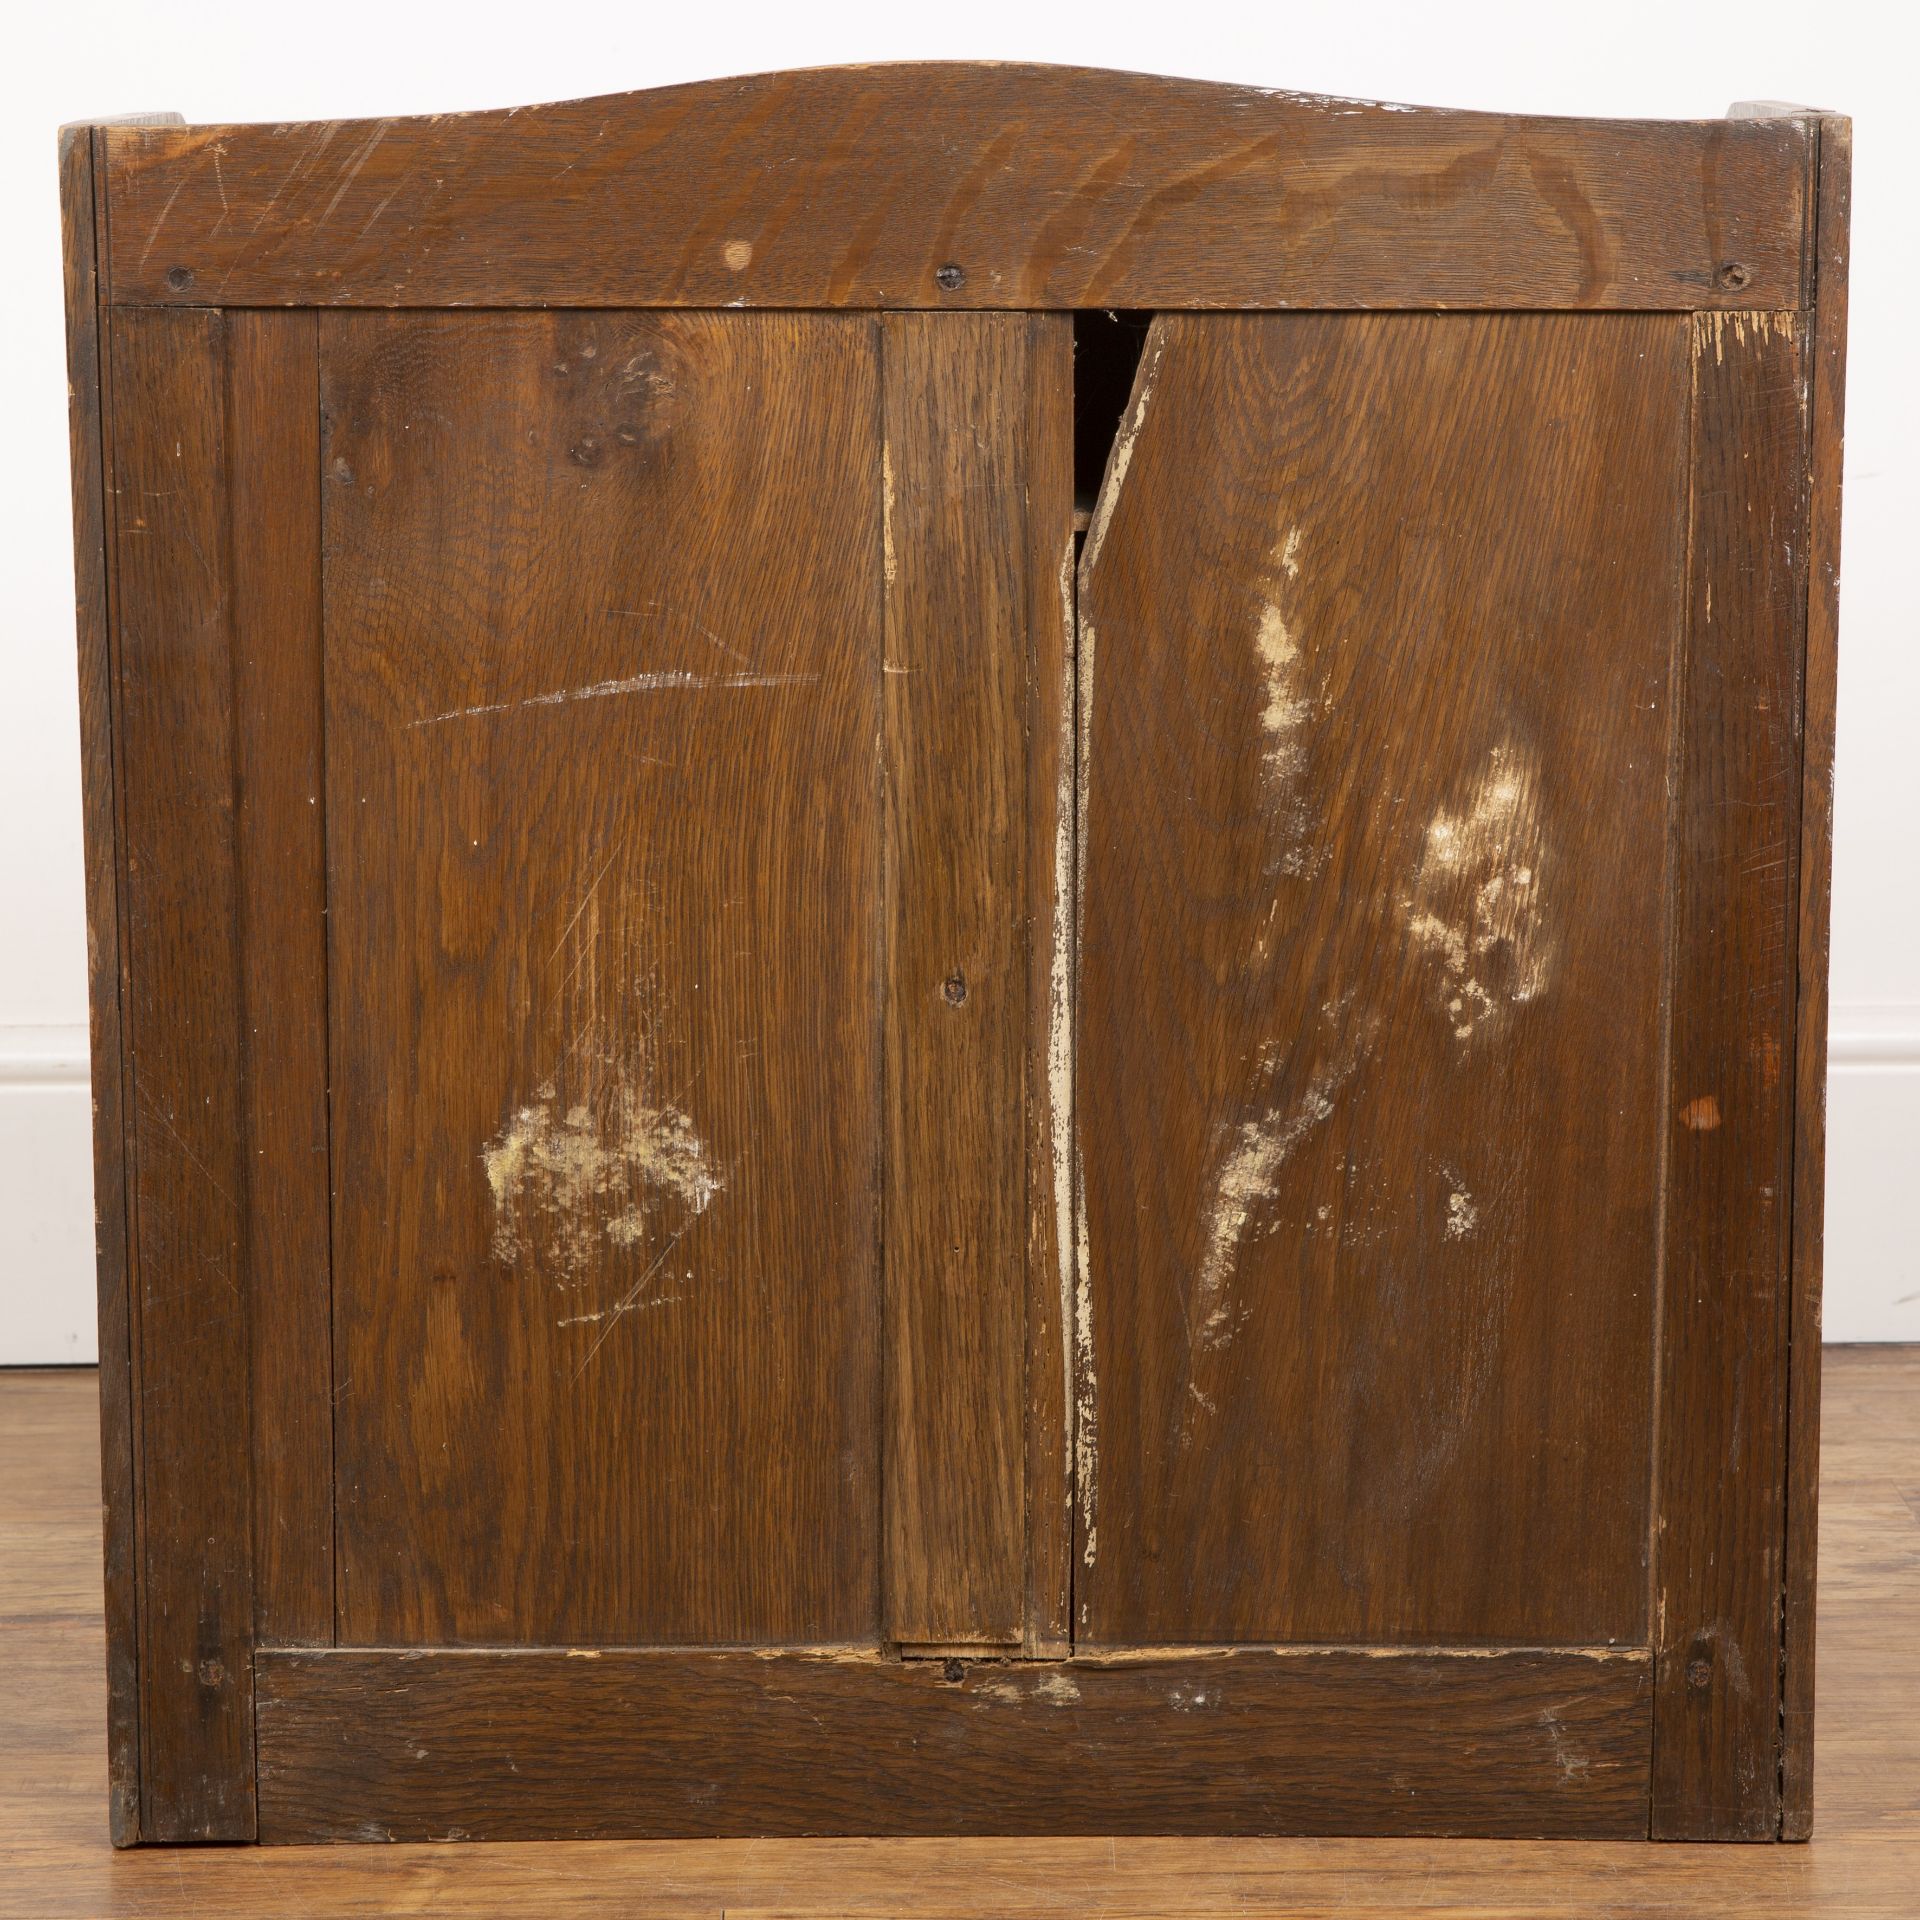 Cotswold School oak, panelled cupboard, with brass ring handle, decorative hinges and a fitted - Image 4 of 6